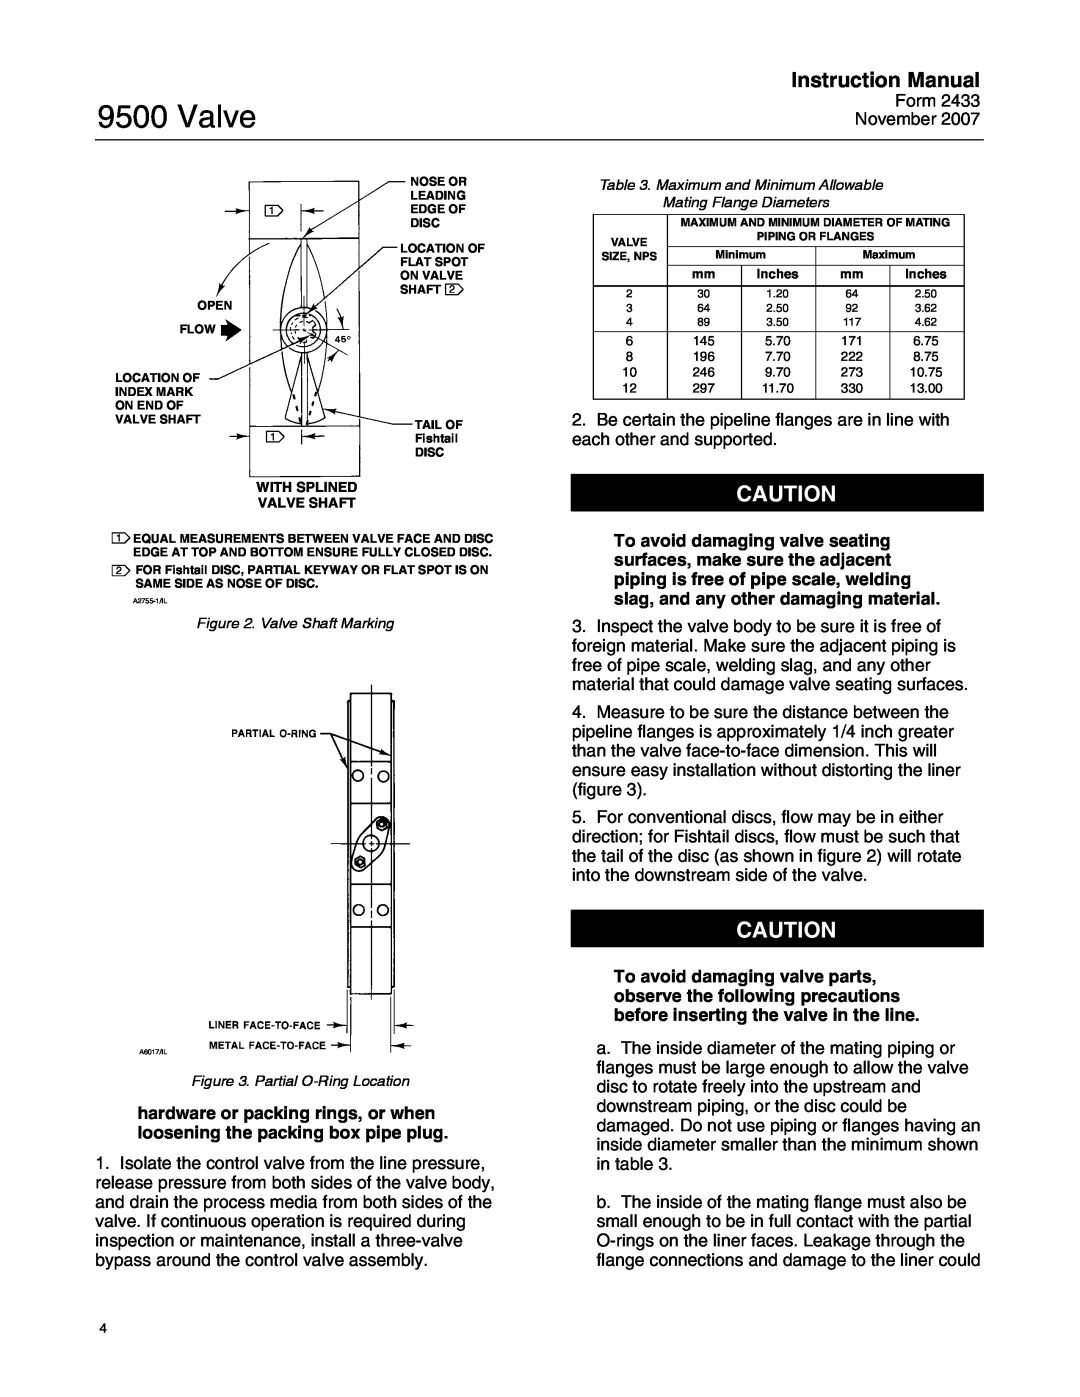 Fisher 9500 Instruction Manual, With Splined Valve Shaft, Valve Shaft Marking, Partial O-Ring Location 